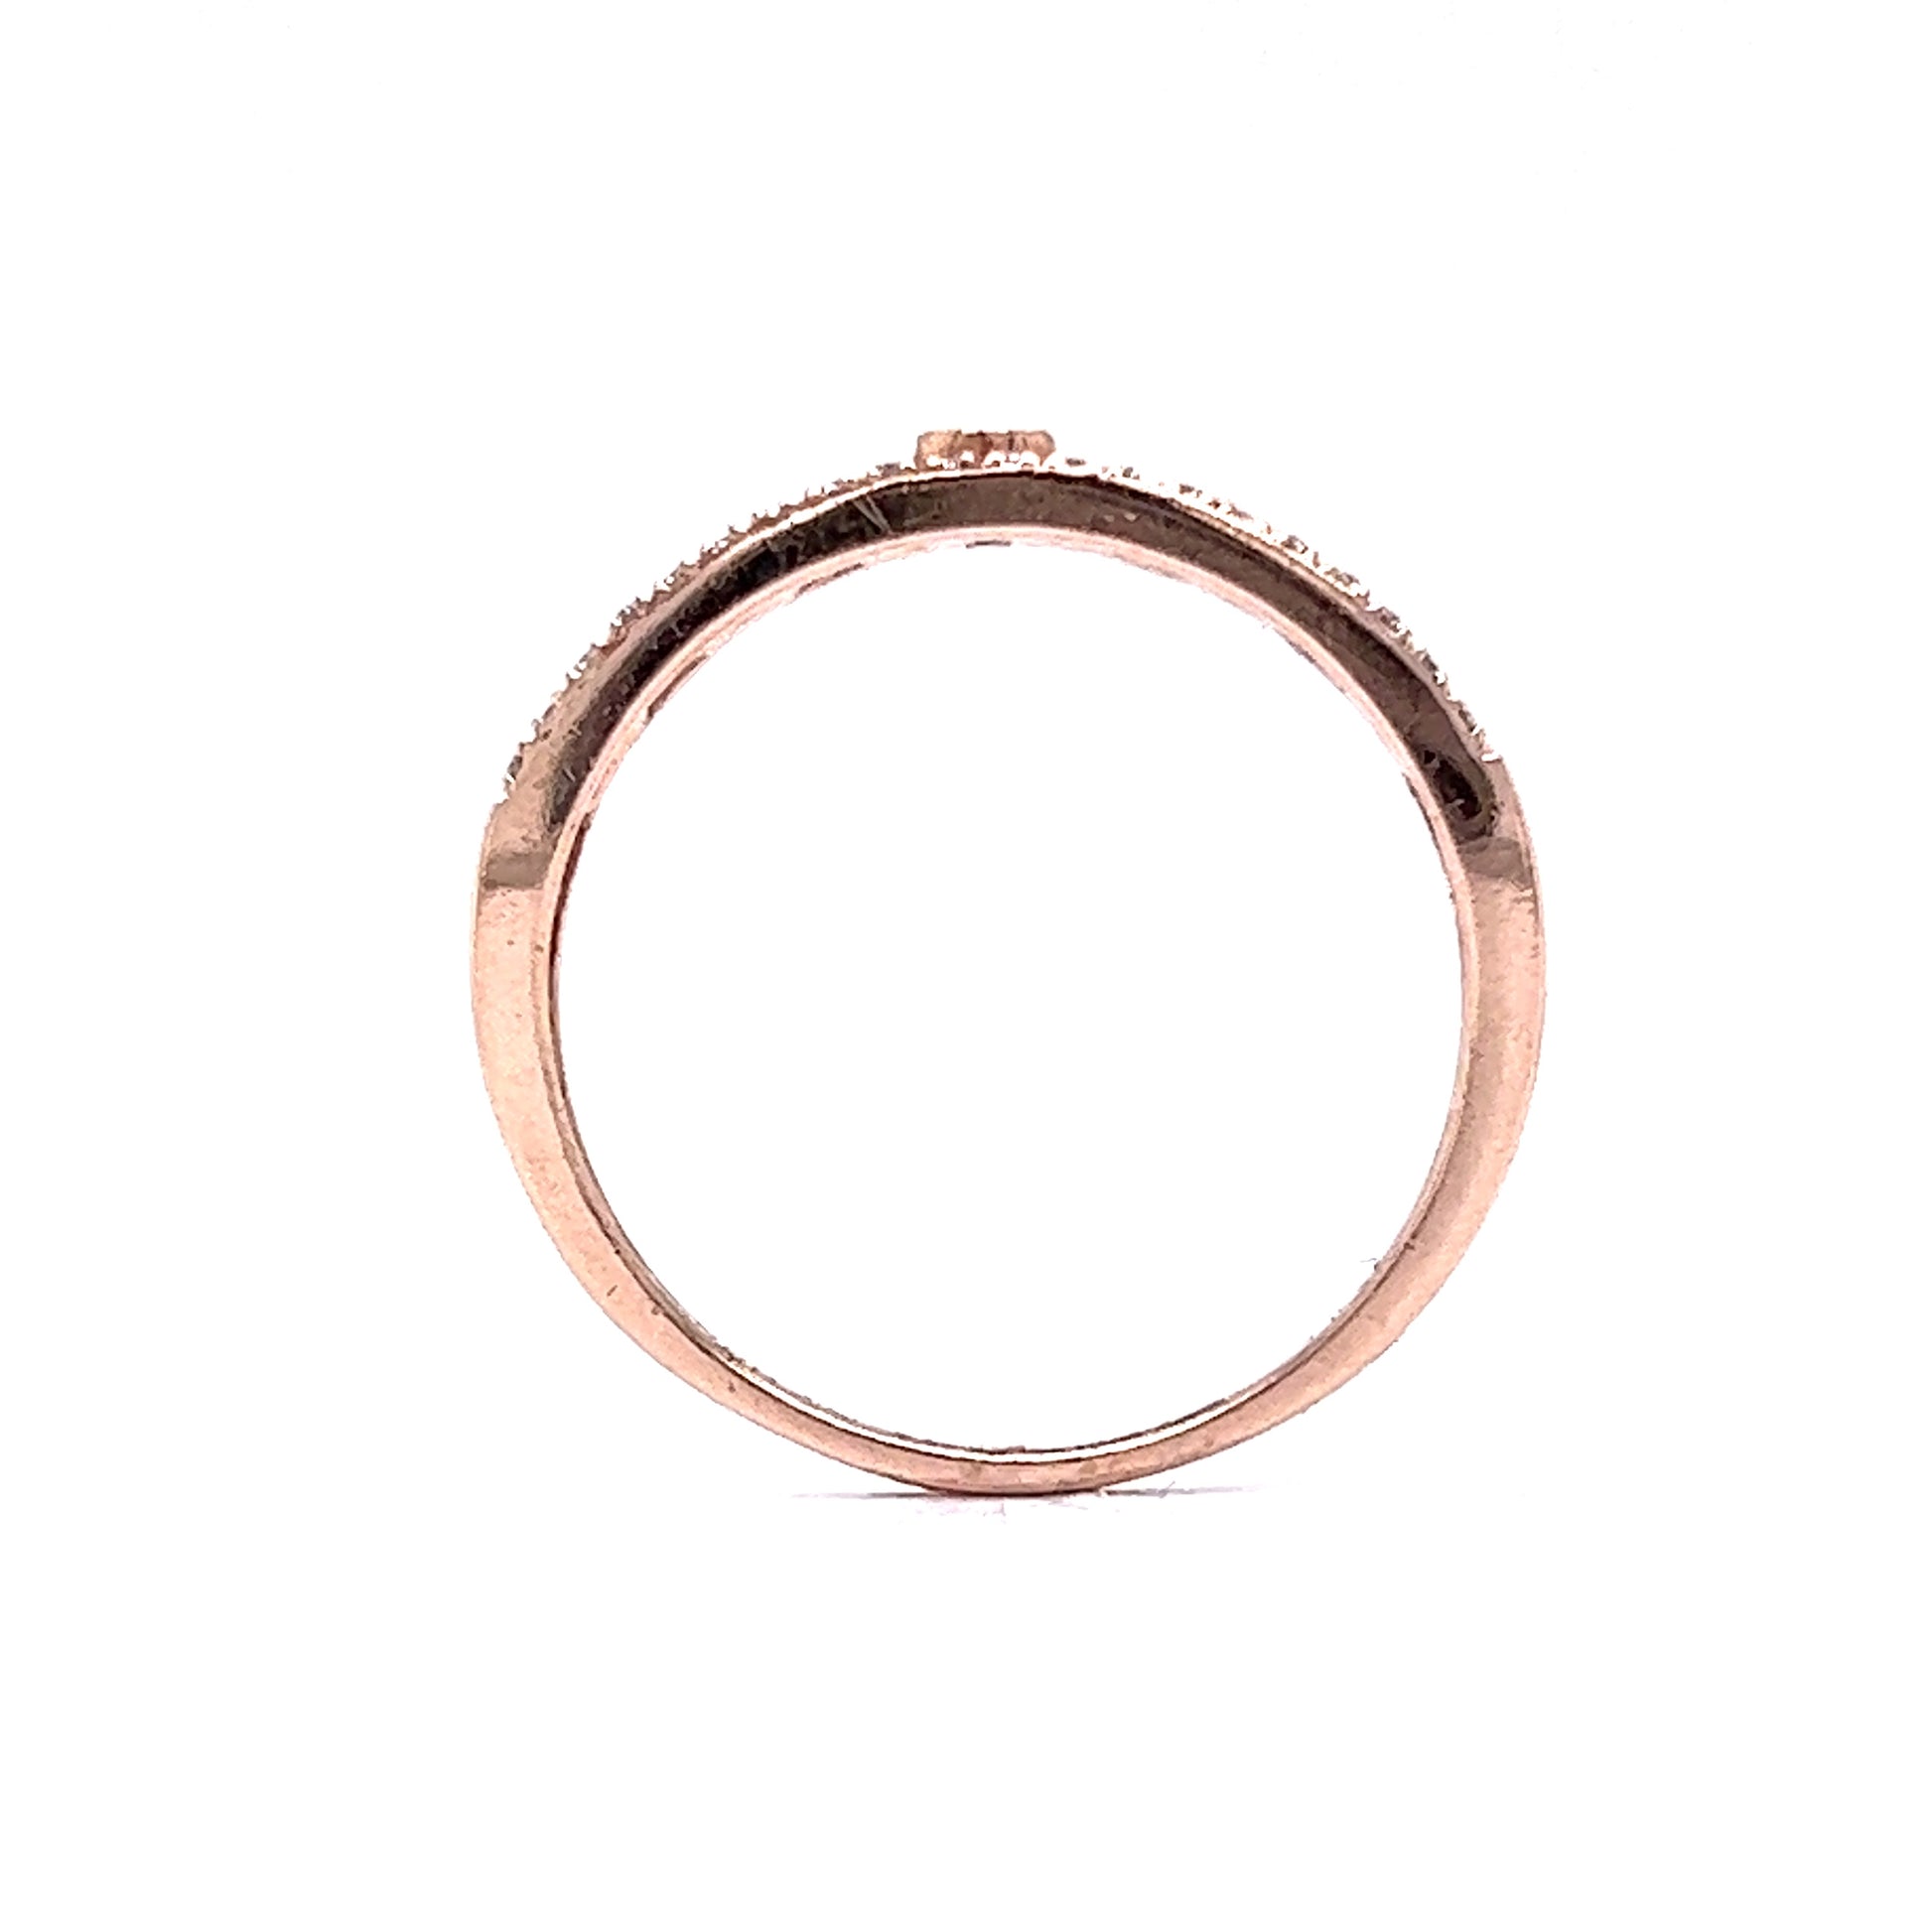 Stacked Diamond Chain Ring in 14k Rose GoldComposition: 14 Karat Rose GoldRing Size: 7Total Diamond Weight: .125 ctTotal Gram Weight: 1.8 gInscription: GND 417